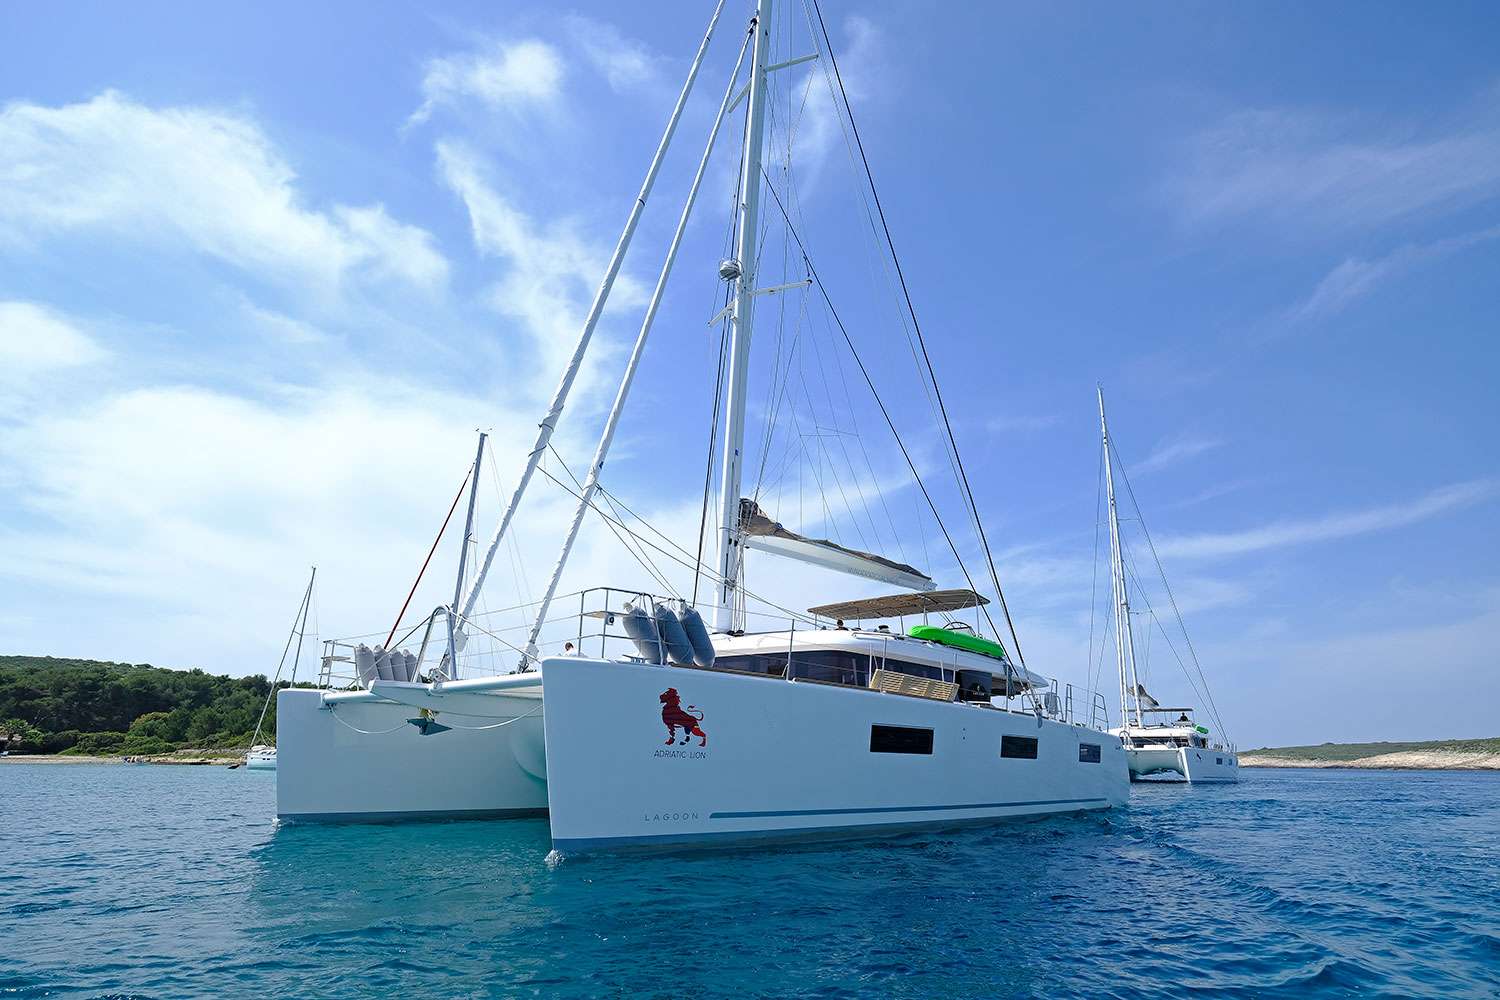 If you want a well built, high performance catamaran, then the Lagoon 620 is one of the best on the market today. Whether you are vacationing with your family, or entertaining guest, this is a catamaran that is hard to beat.

Lagoon 620 Adriatic Lion is ideal for the clients who wants to experience the art of living aboard in an innovative way.

There is just nothing to compare to relaxing aboard this charming &amp; luxurious catamaran. Lagoon 620 Adriatic Lion with five queen size en-suite cabins design is very accommodating. Complete interior layout is elegantly incorporating wood finish, upholstery, inner liners, and more. A functional fly bridge can also accommodate guests thanks to separate crew and reception areas. Saloon and cockpit are beautifully integrated and include &ldquo;wet bar&rdquo;, areas for lazing around and the option on taking delicious meals inside or out without having to make any adjustments.